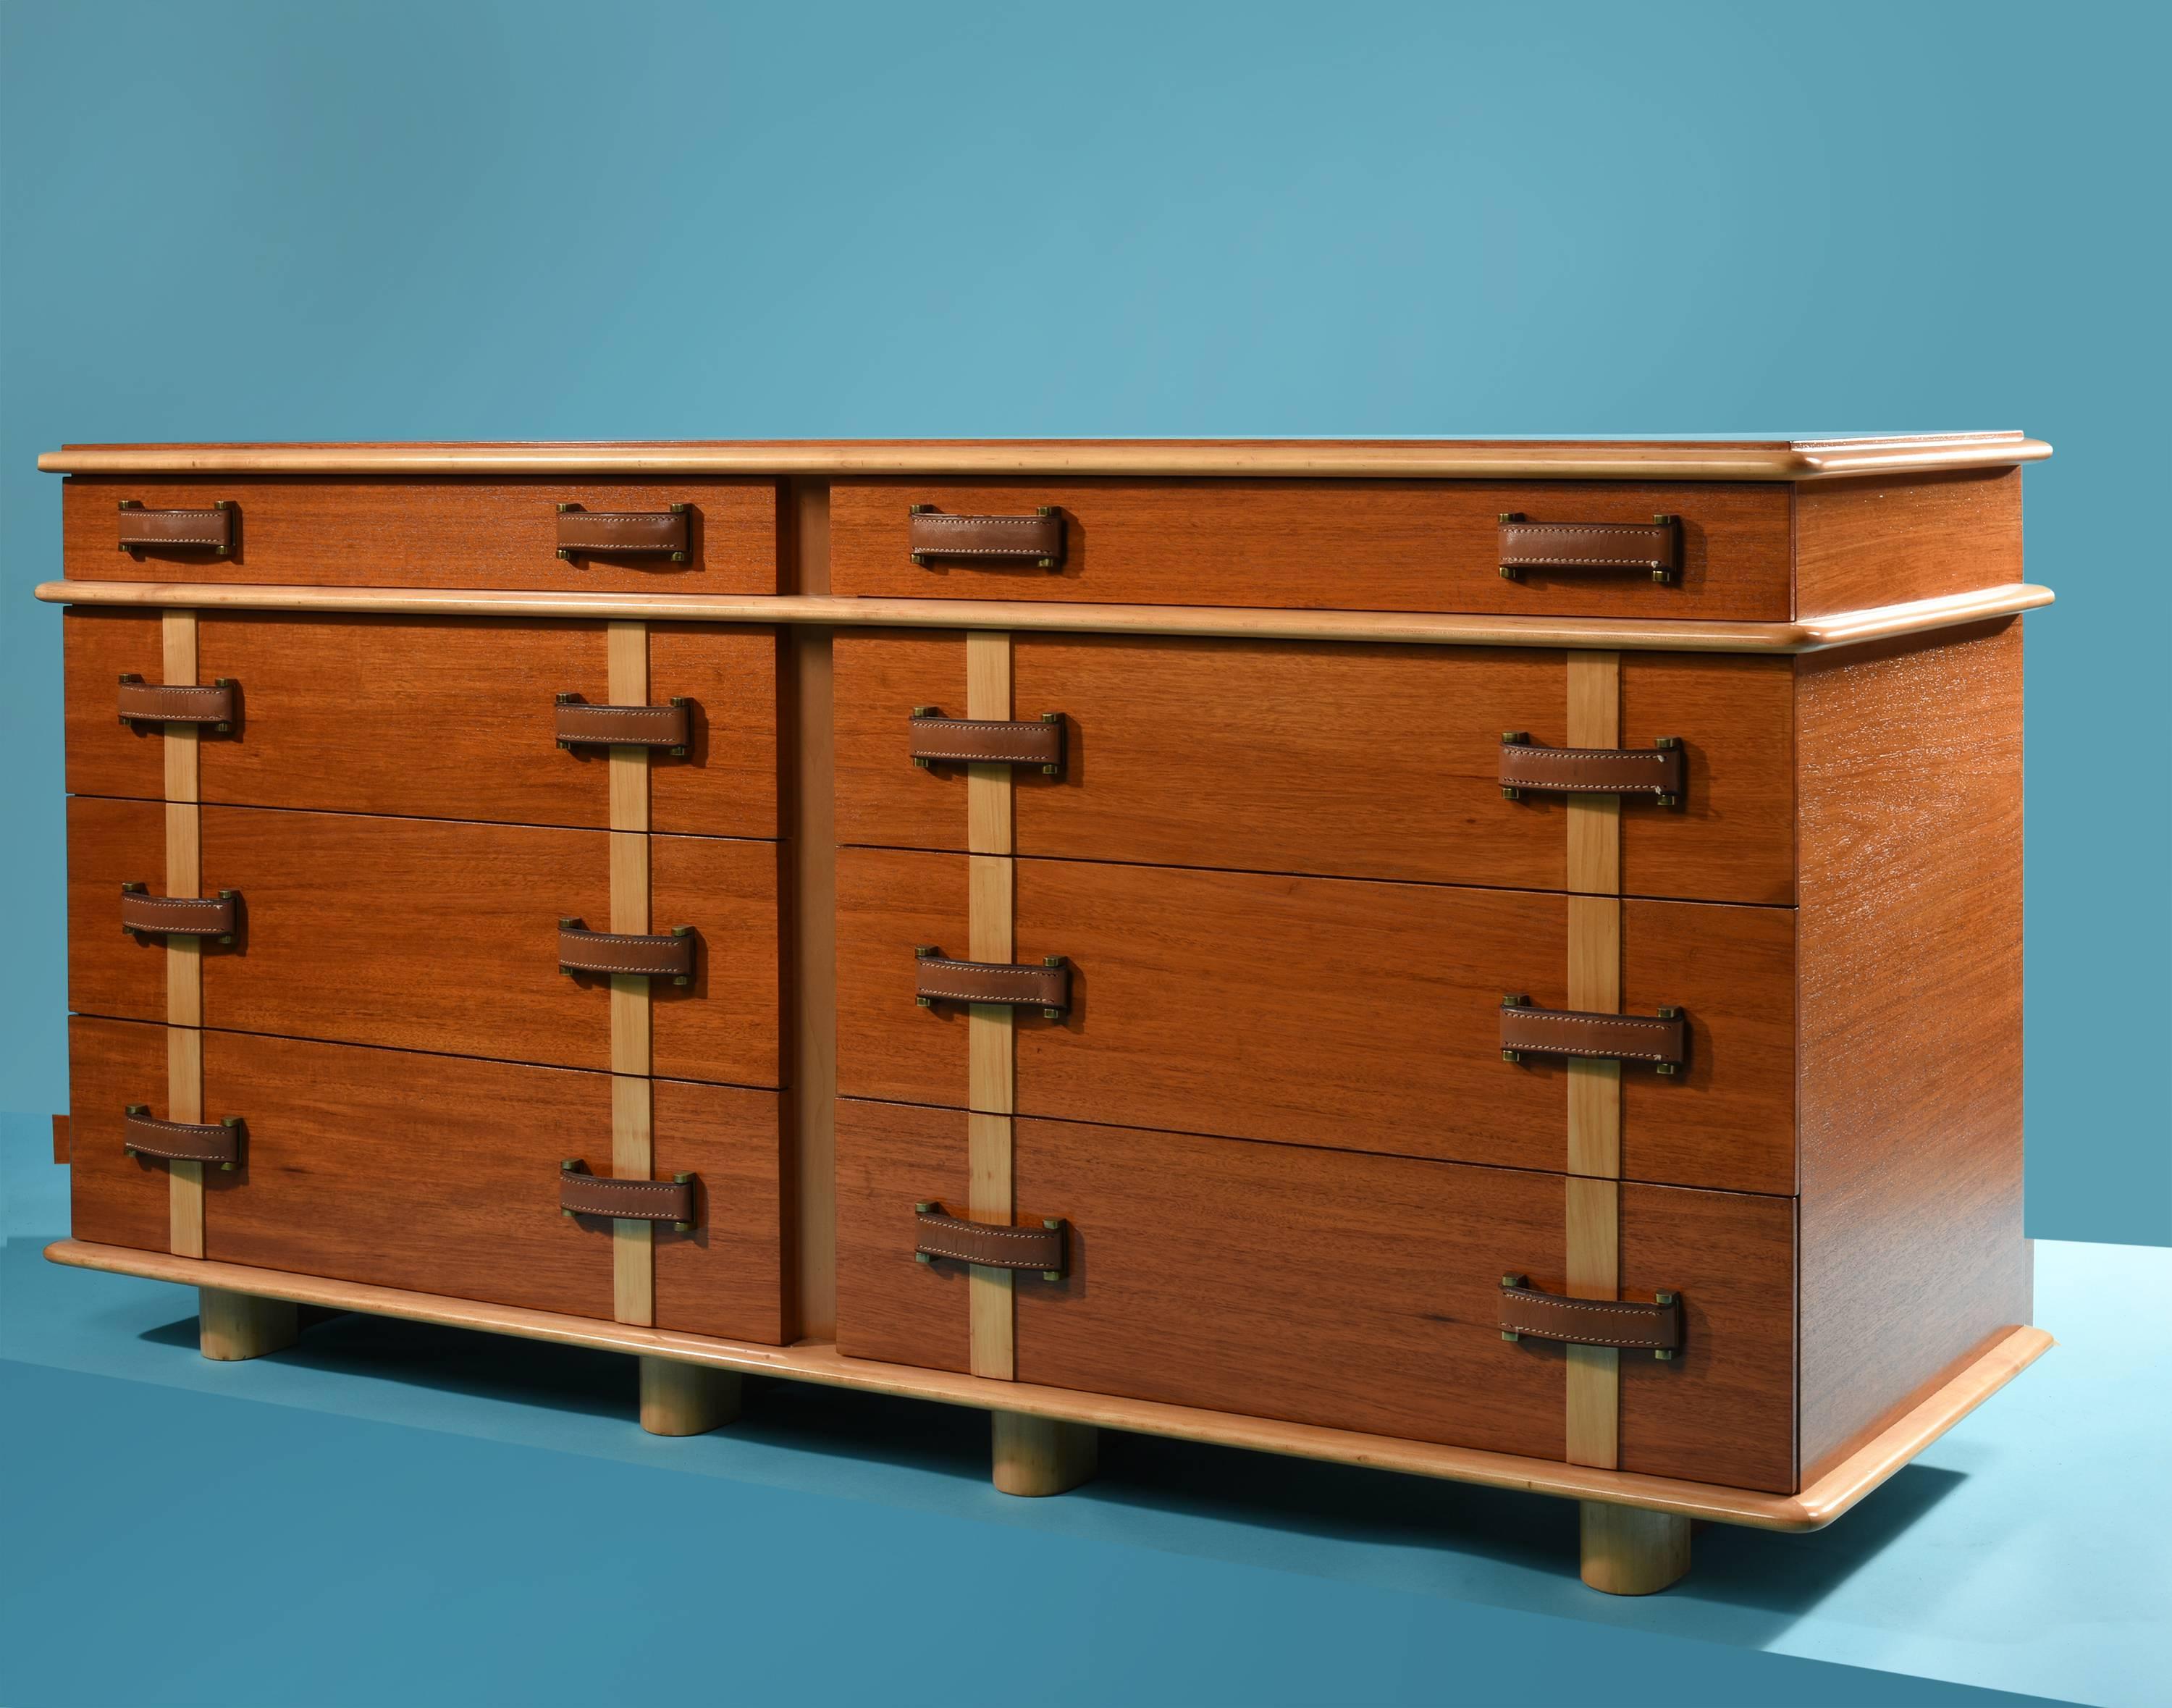 Paul Frankl for Johnson Furniture Company cabinet, from the Station Wagon series

USA, 1945

Mahogany, birch, leather, maple, brass 
Eight drawers with stitched leather pulls

Measures: 66 W x 22 D x 32 H in 
168 x 56 x 81 cm 

Signed: